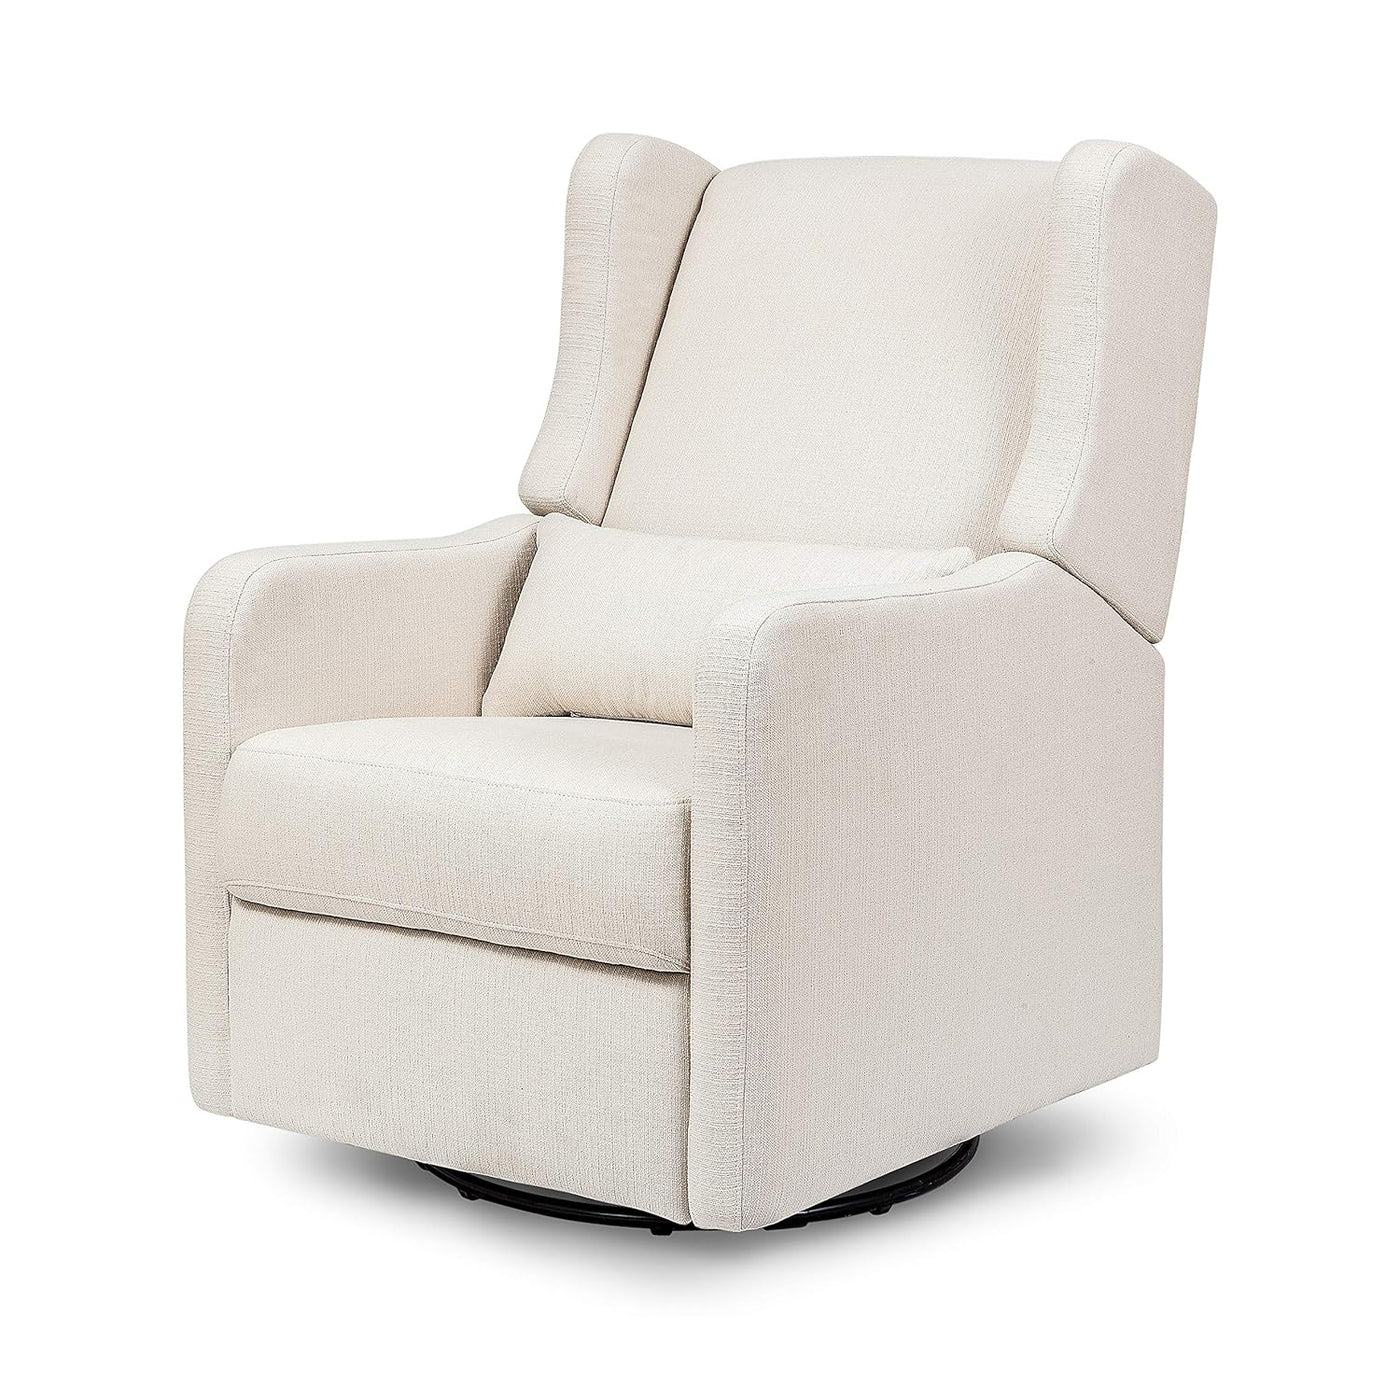 DaVinci Carter's Arlo Recliner and Swivel Glider, Water Repellent & Stain Resistant - $300